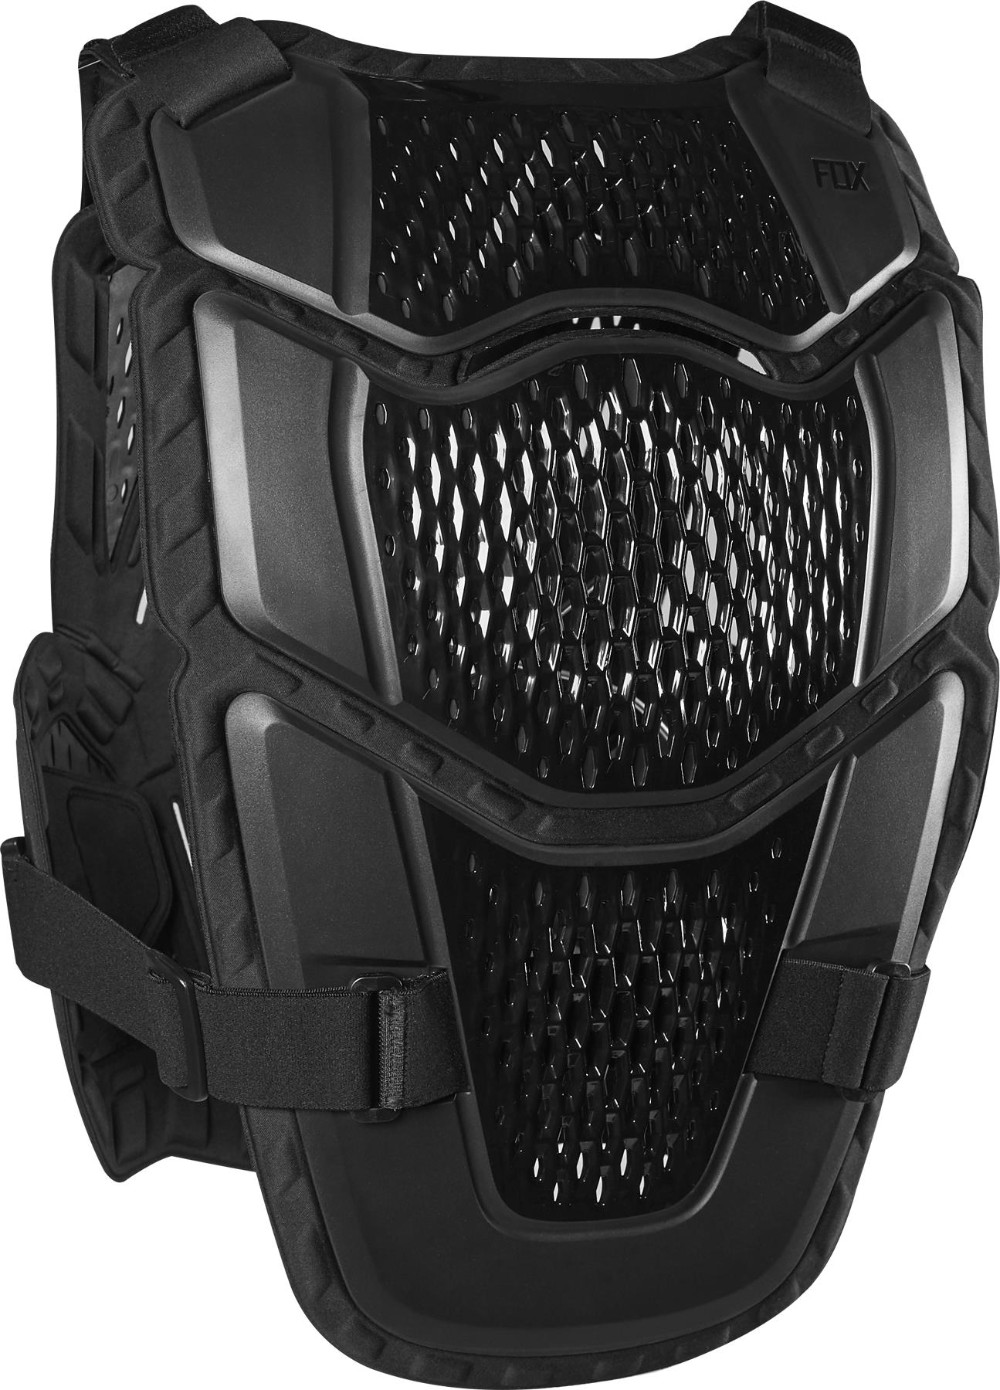 Raceframe Impact MTB Chest Guard image 1